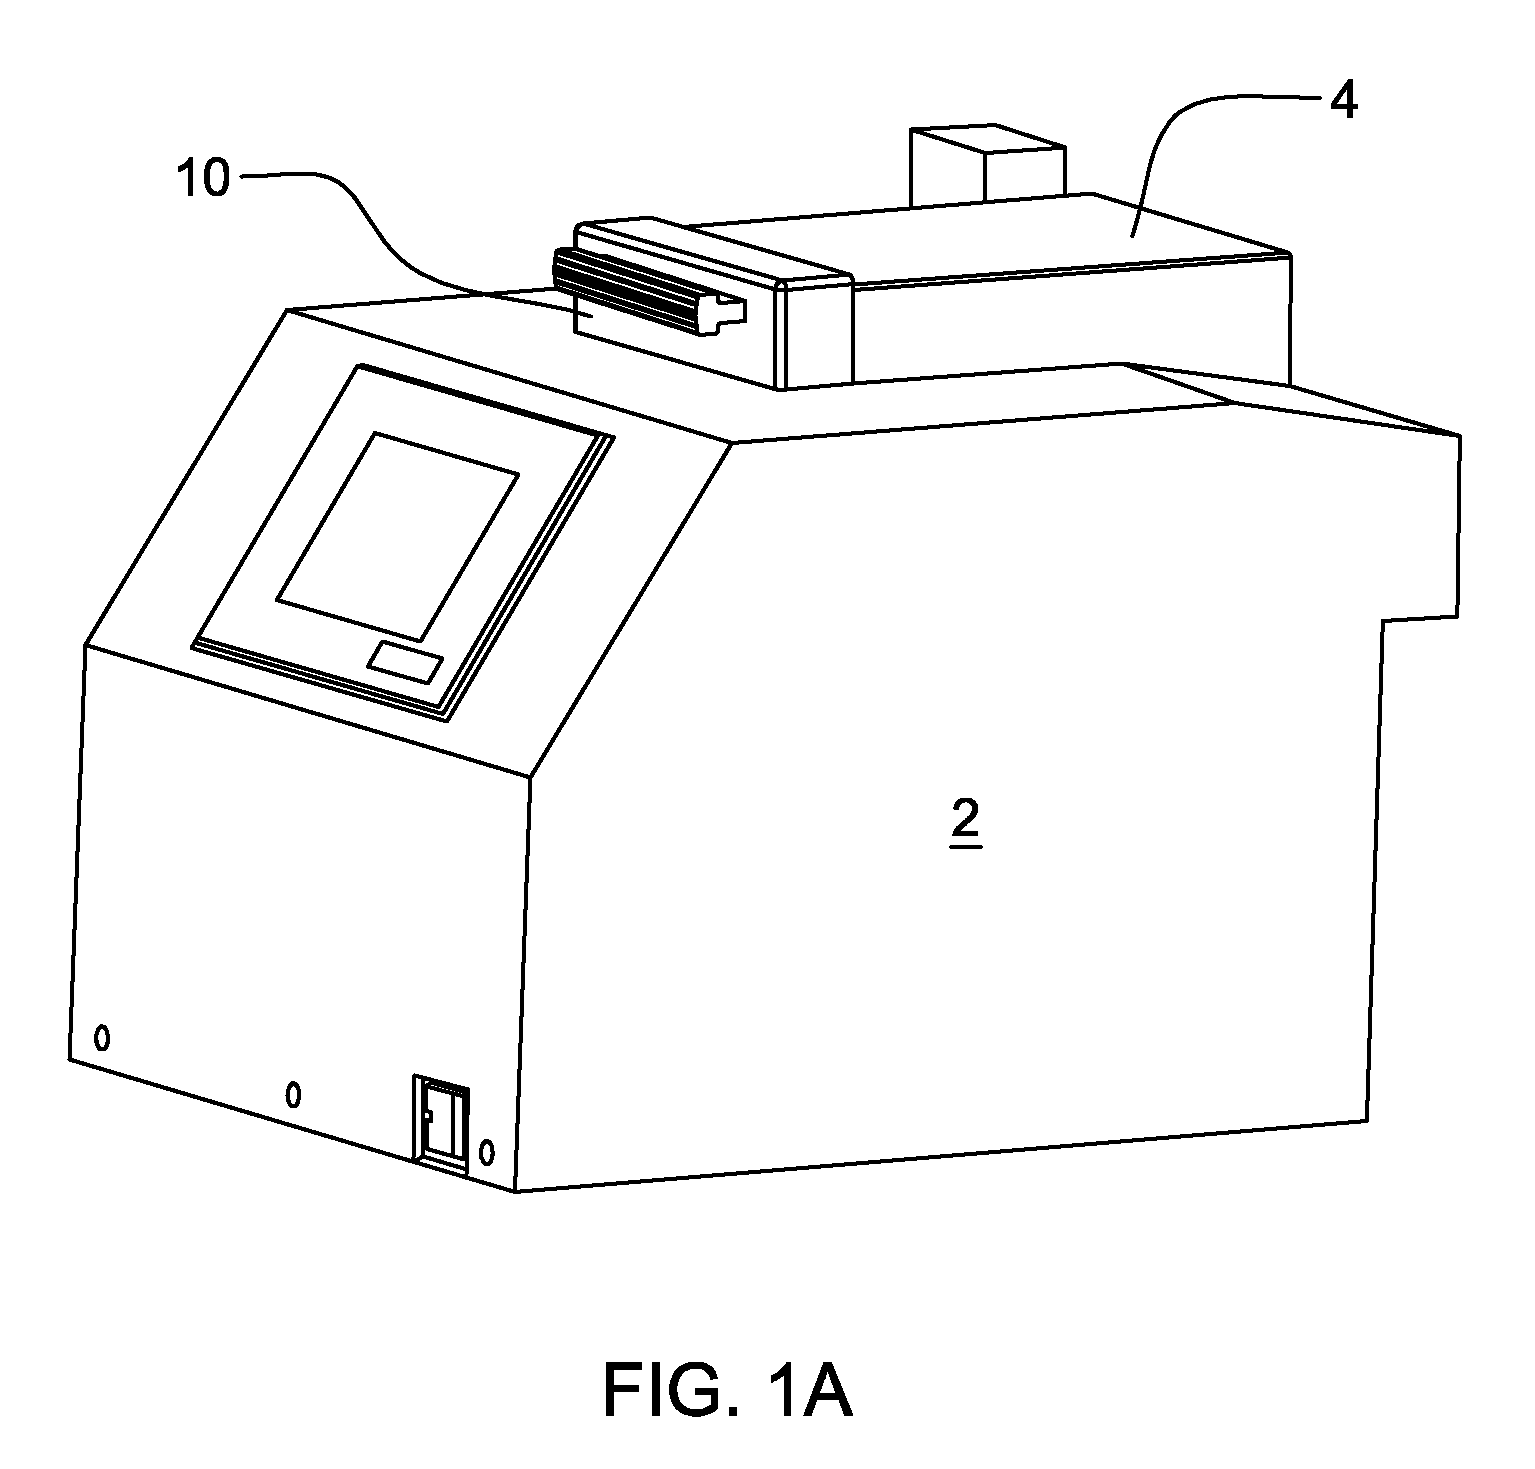 Sliding sample cell insertion and removal apparatus for x-ray analyzer